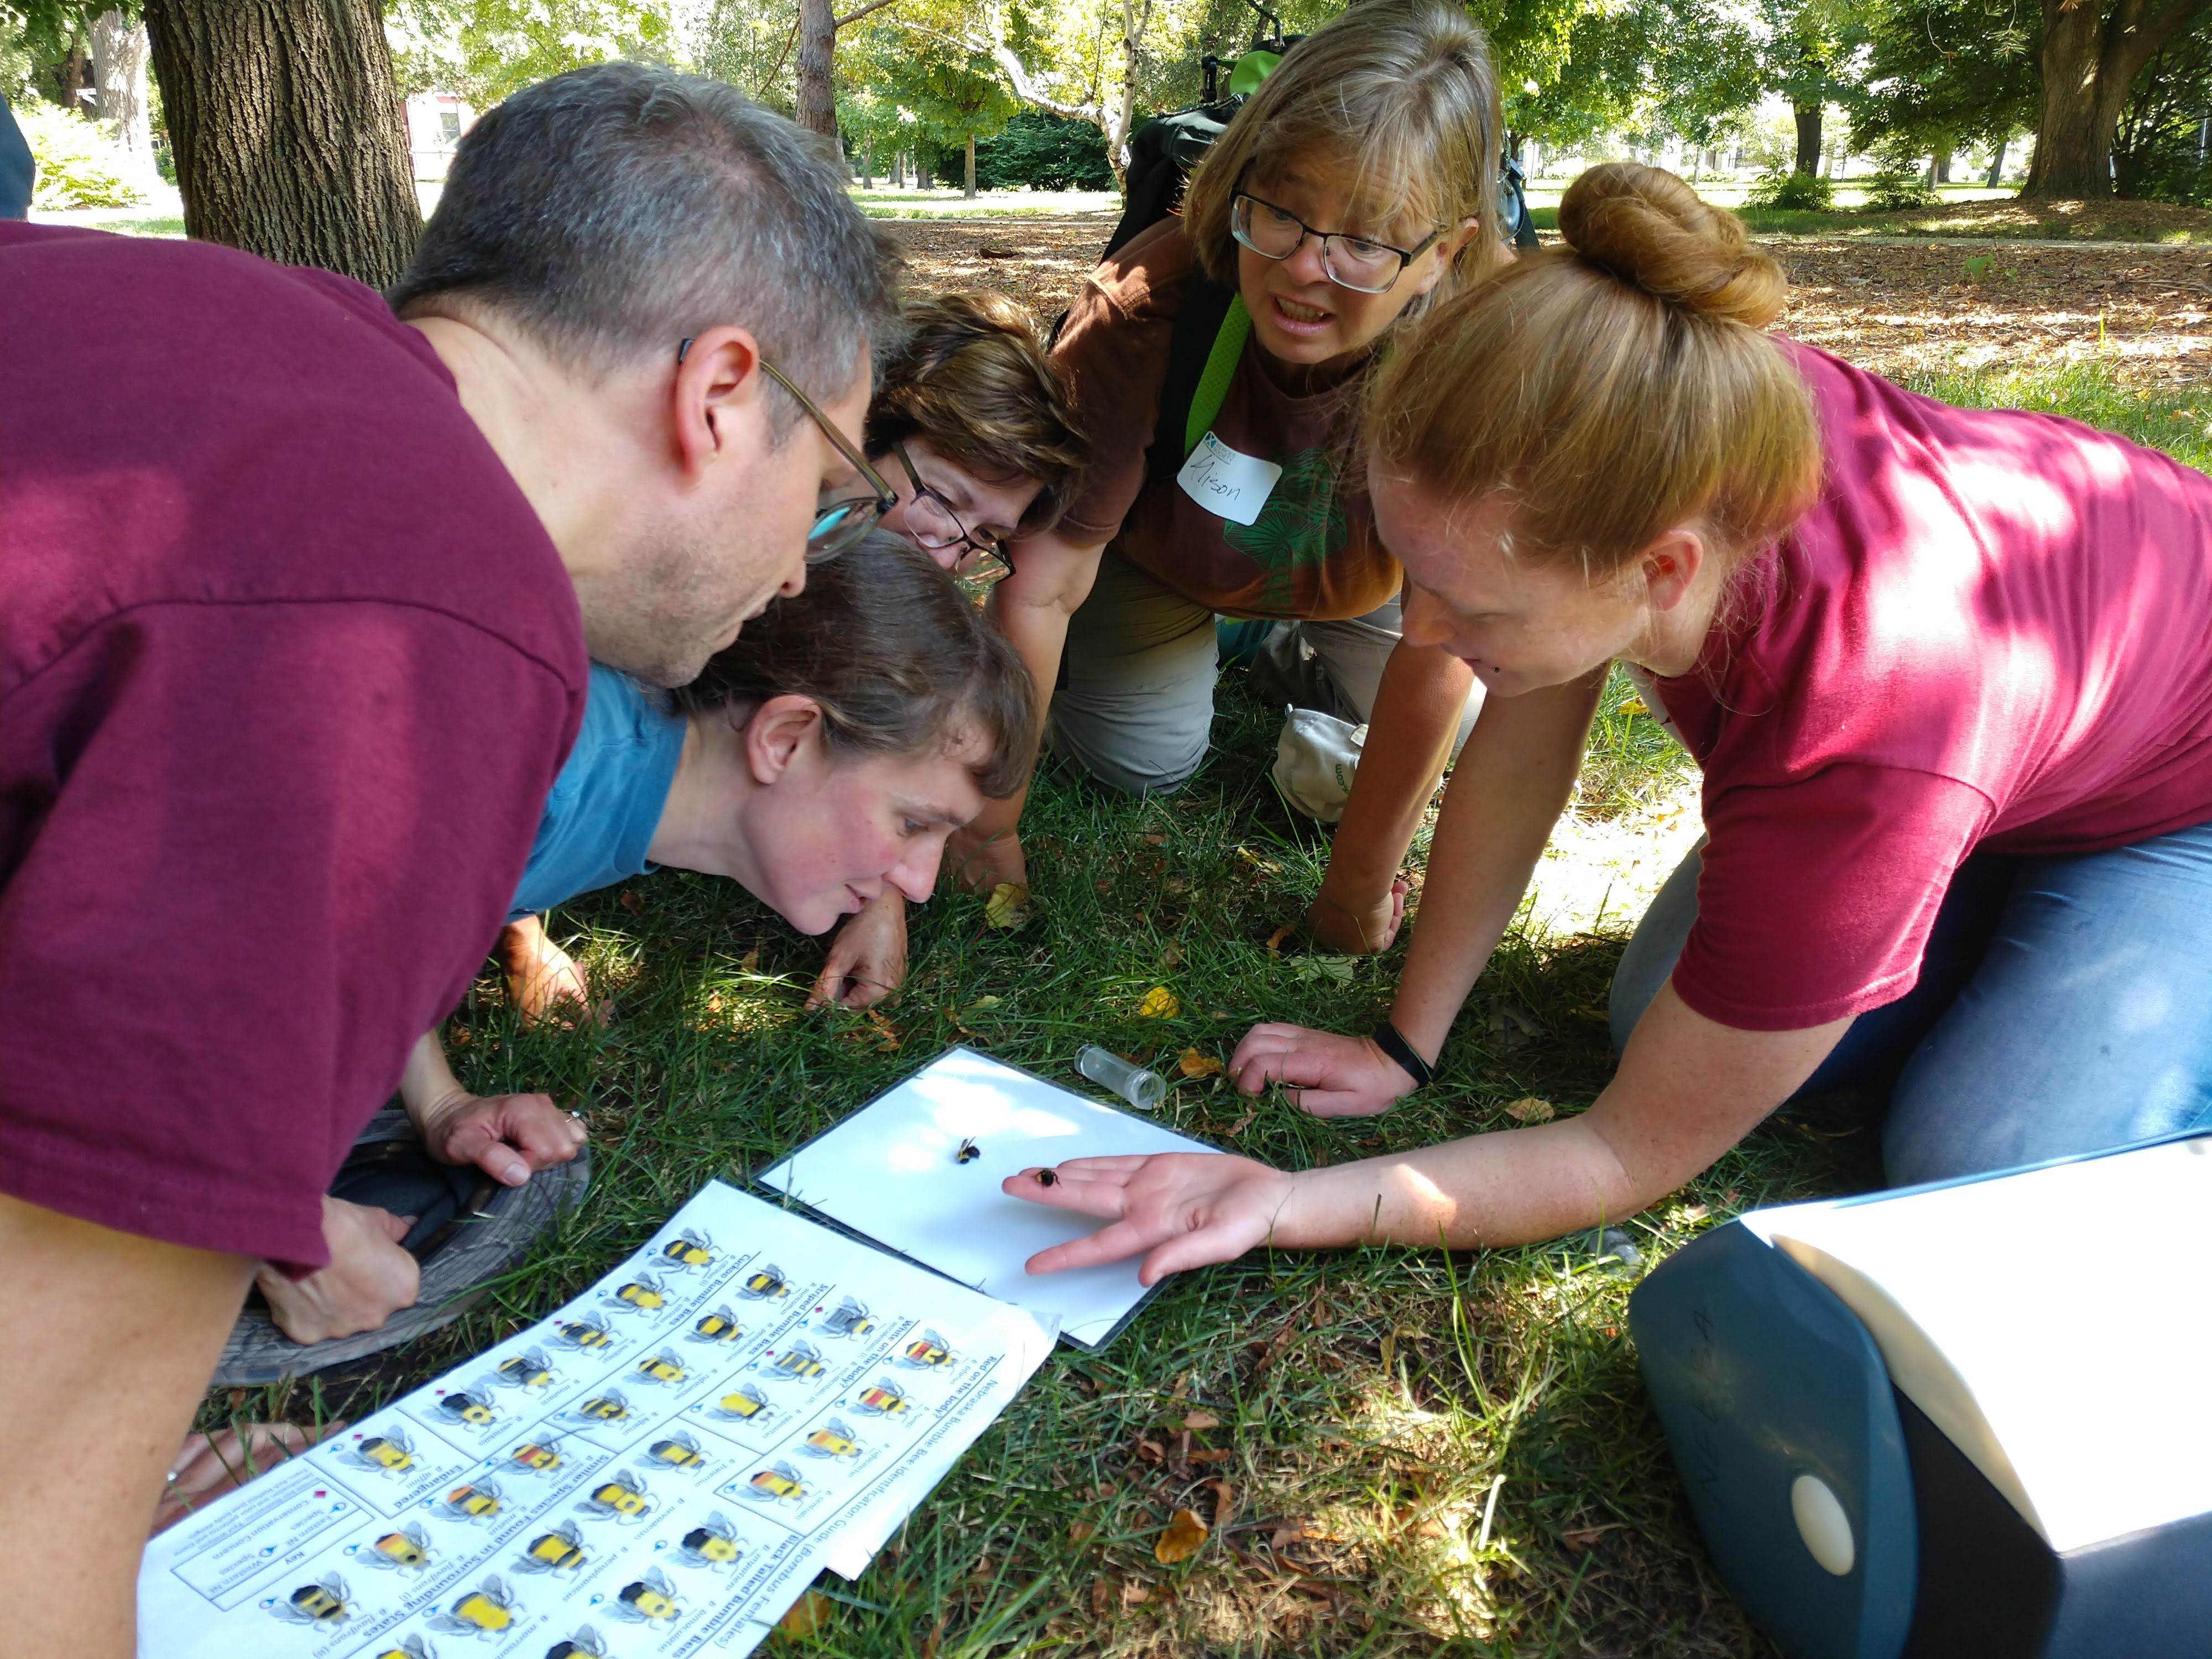 A group of people seated on the grass lean in to look at a small plastic vial on the ground, next to a sheet of diagrams for bee identification.